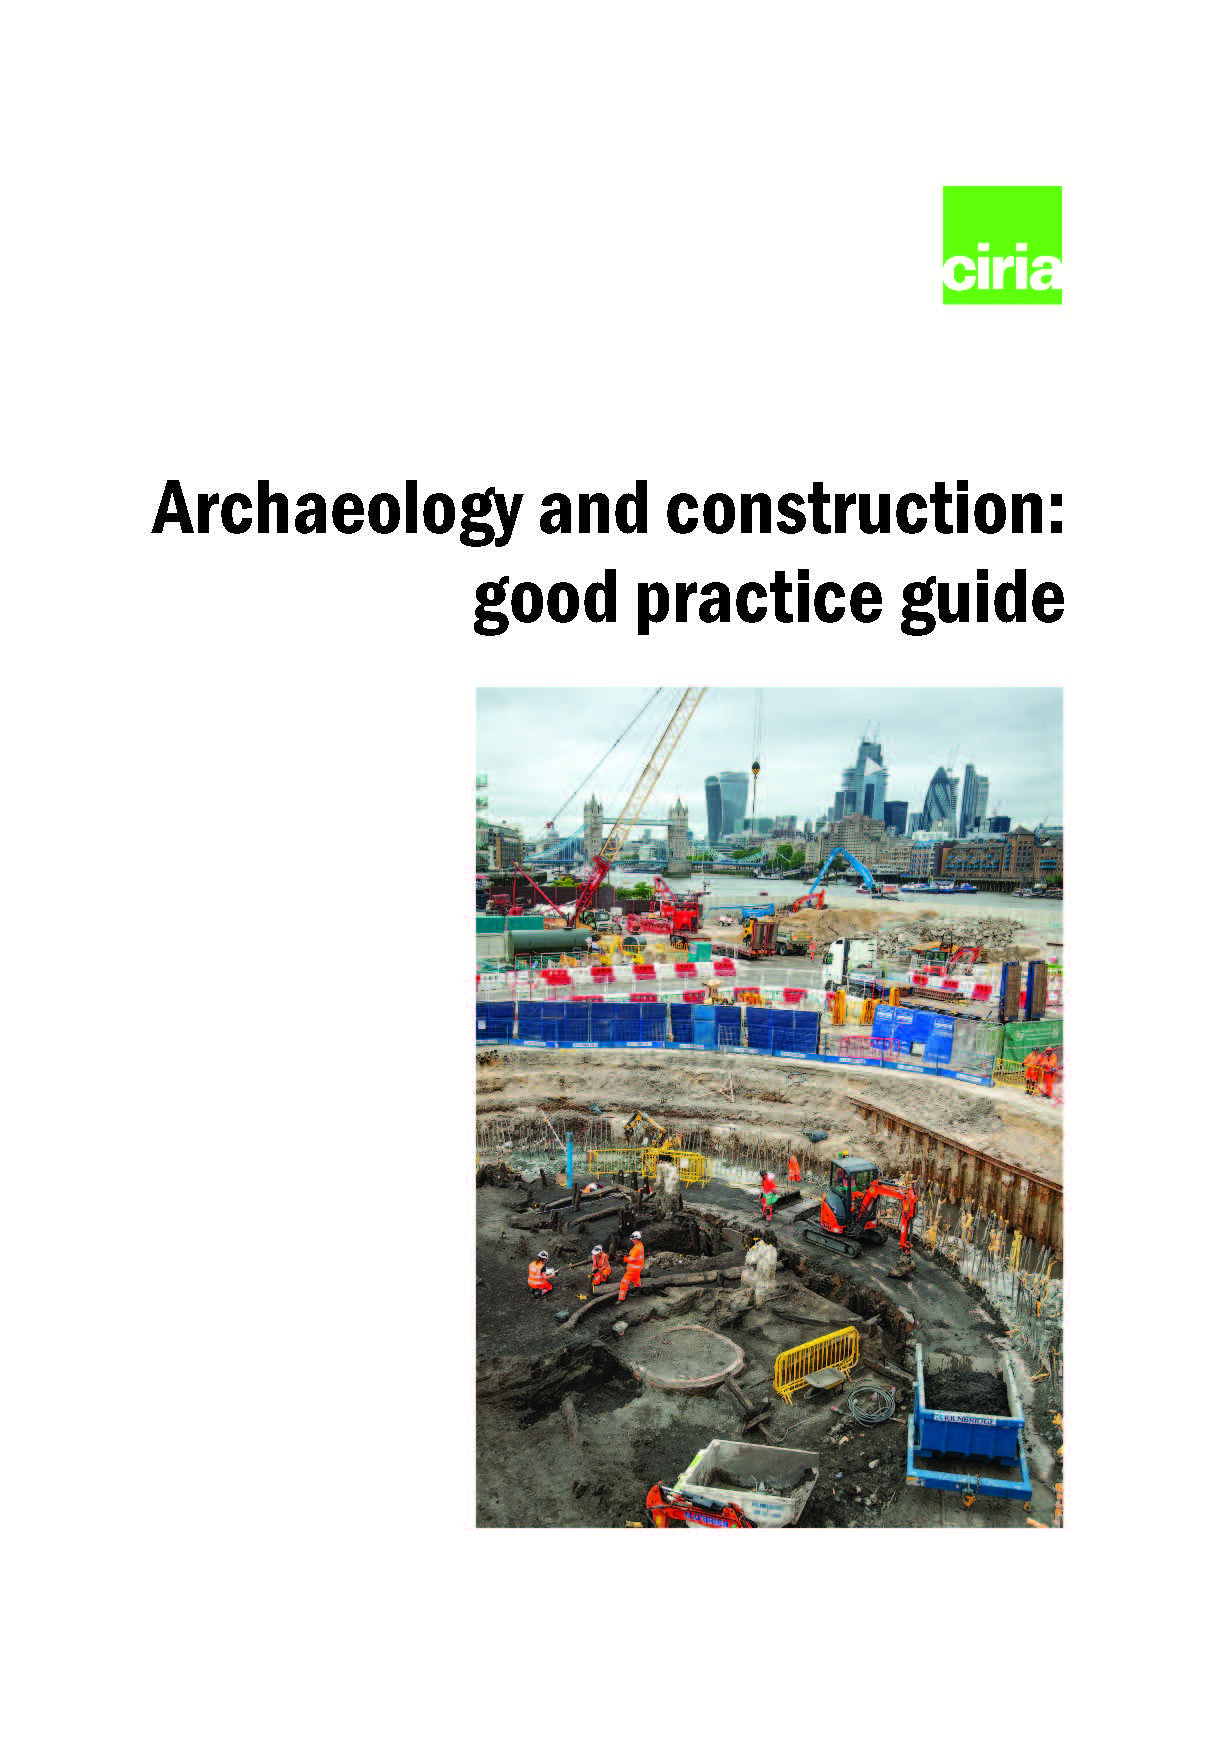 Archaeology and construction: good practice guidance